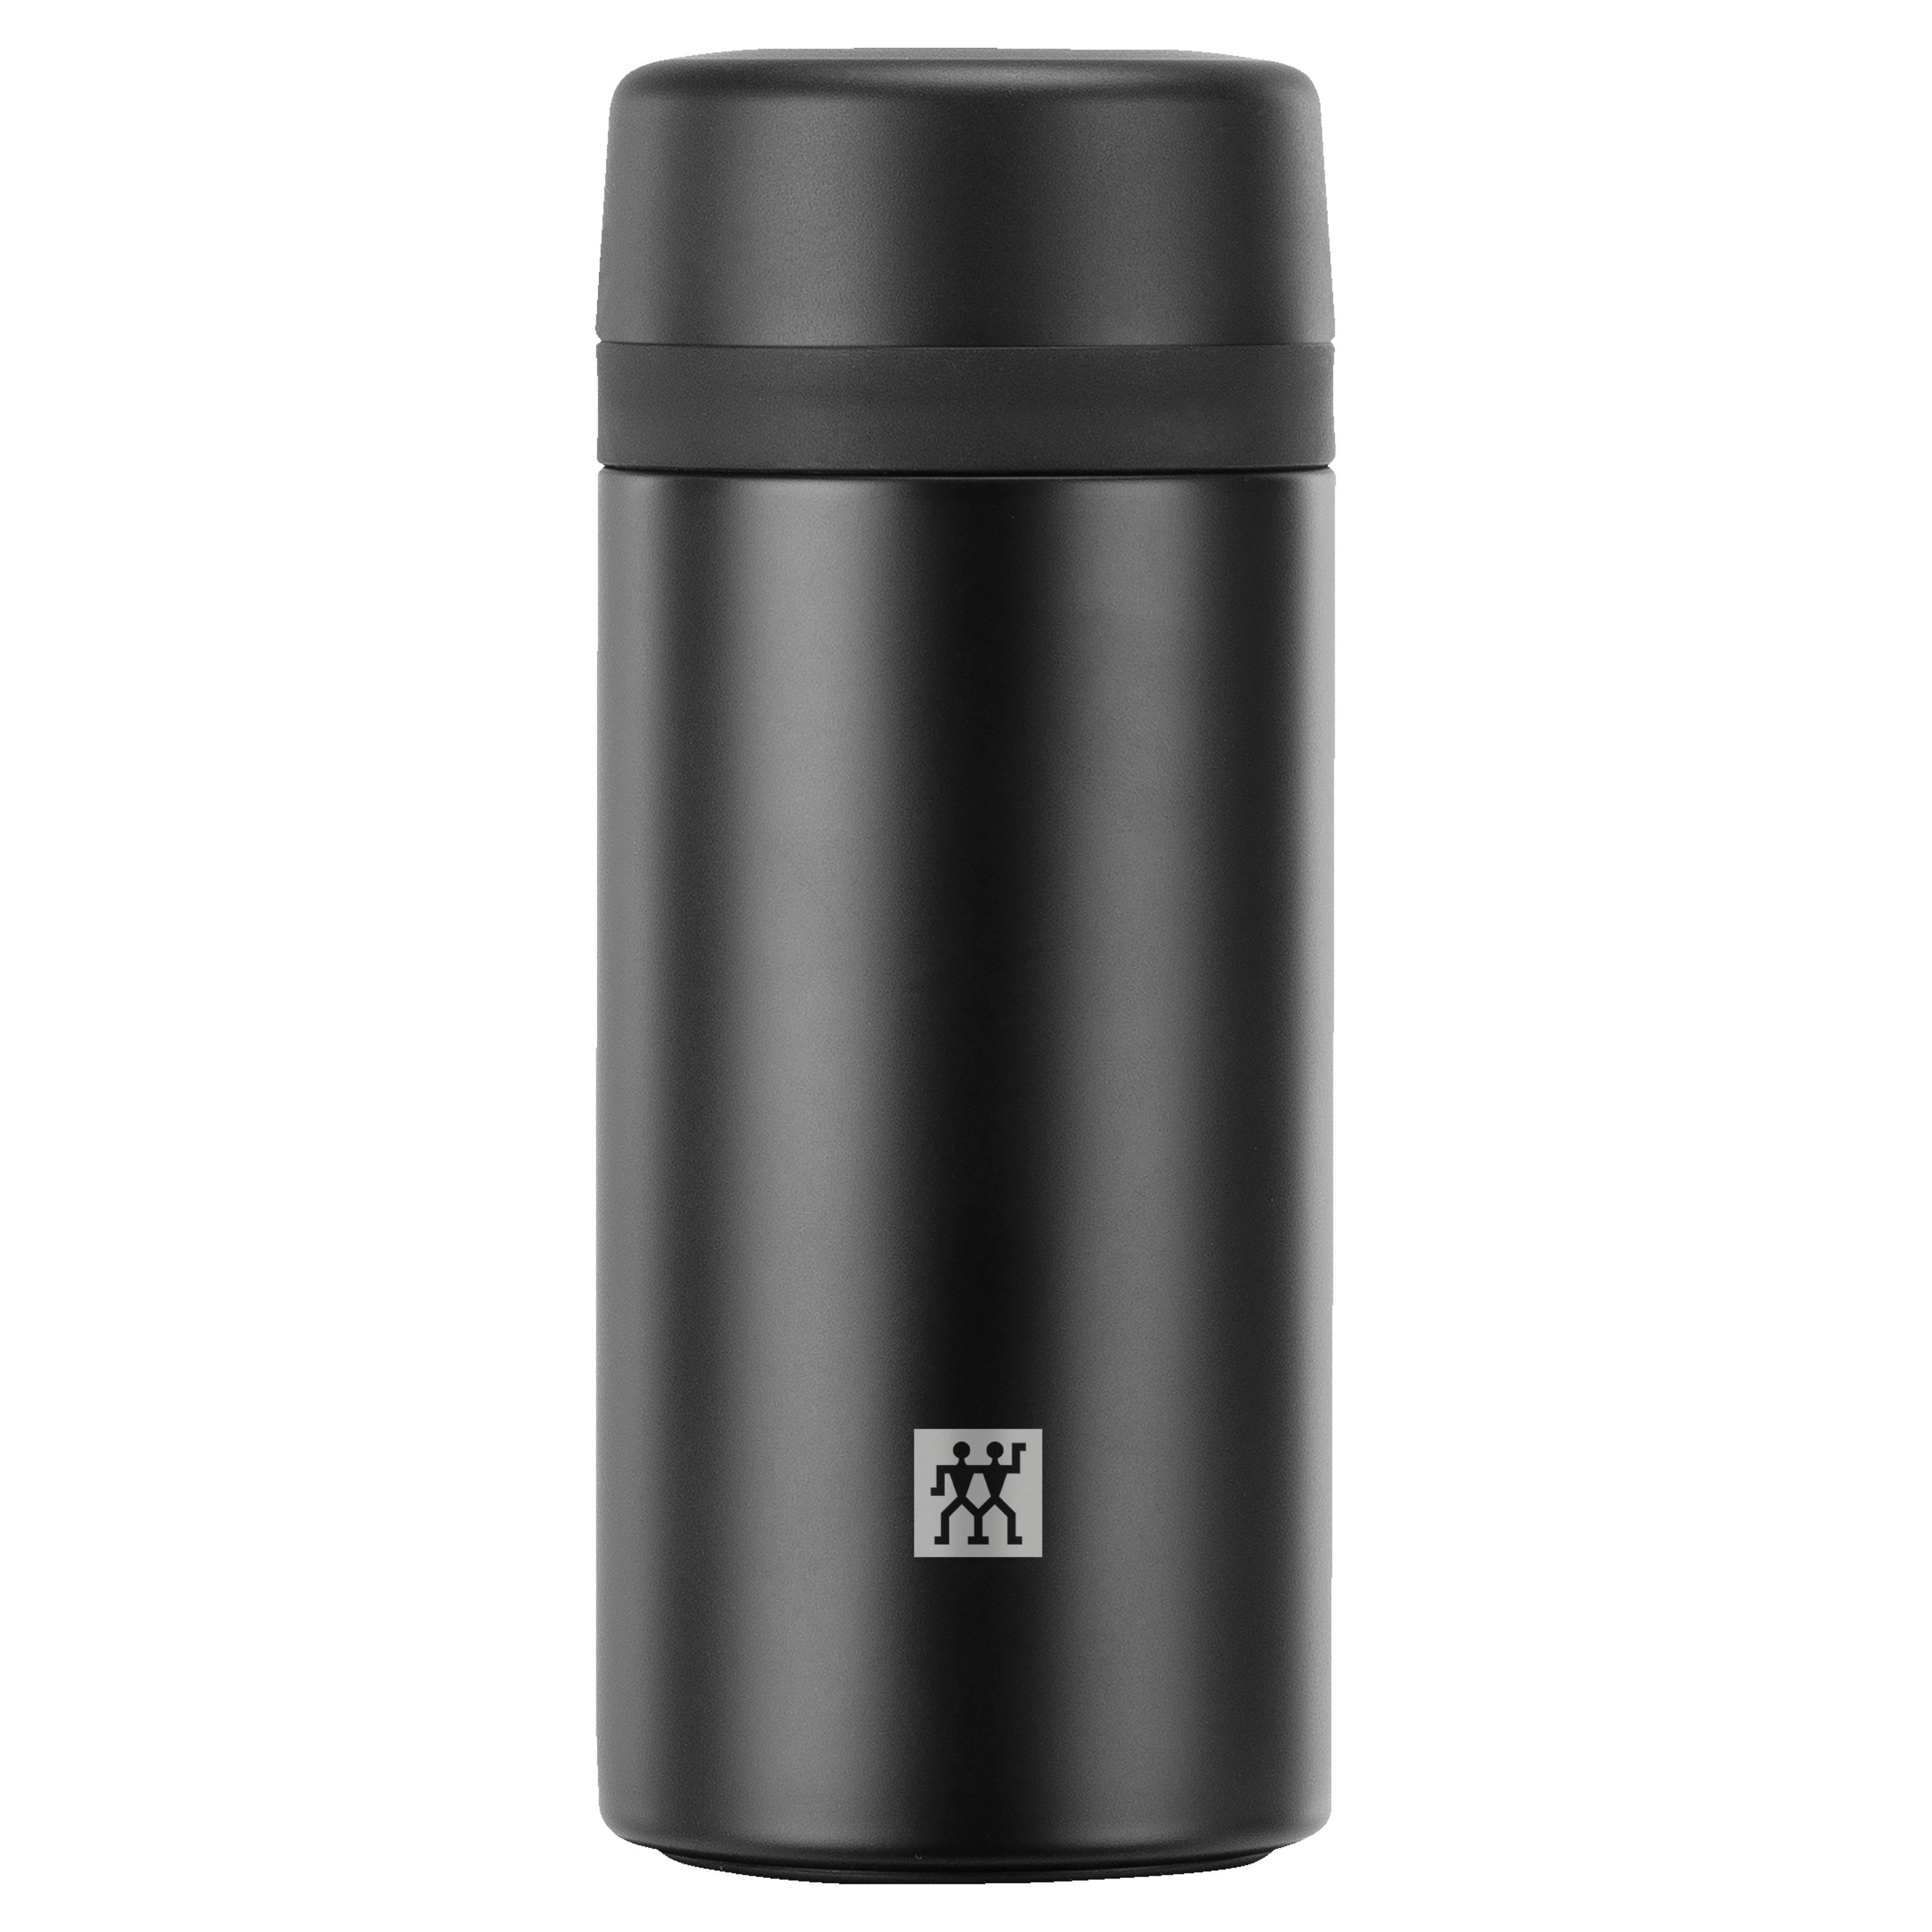 traditional thermos flask